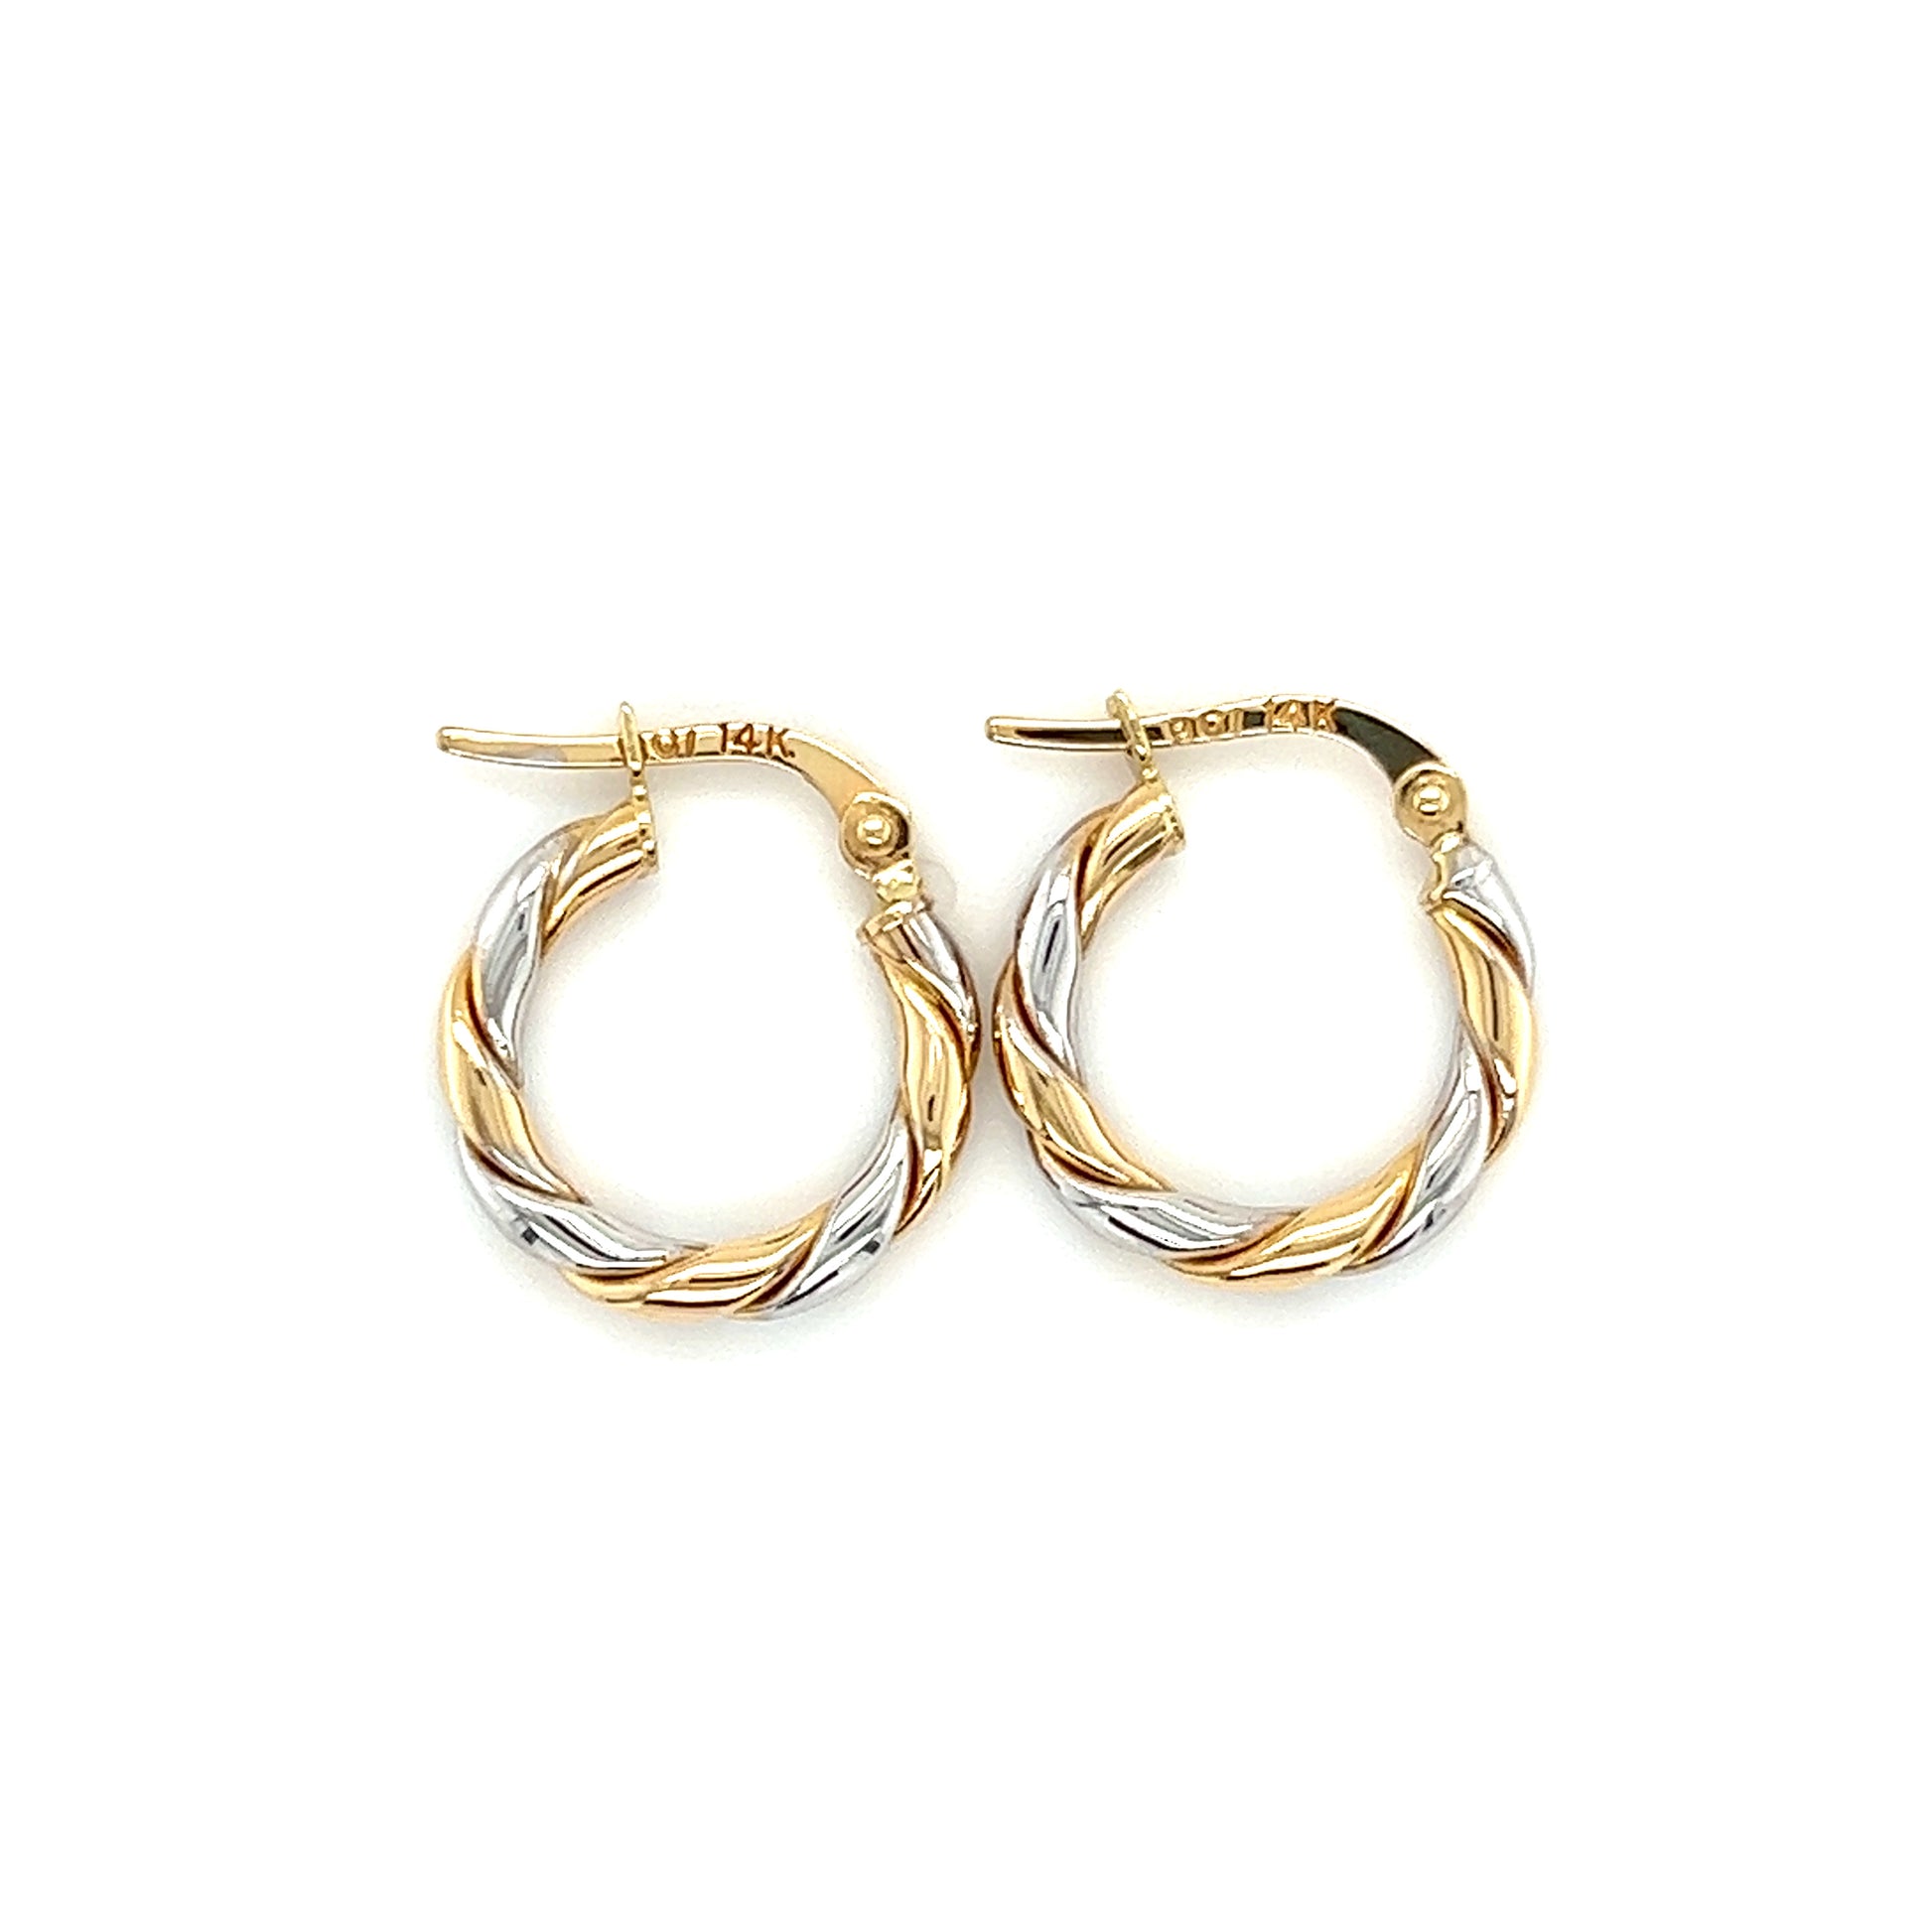 Twisted Hoop Earrings 15mm in 14K White and Yellow Gold Top View